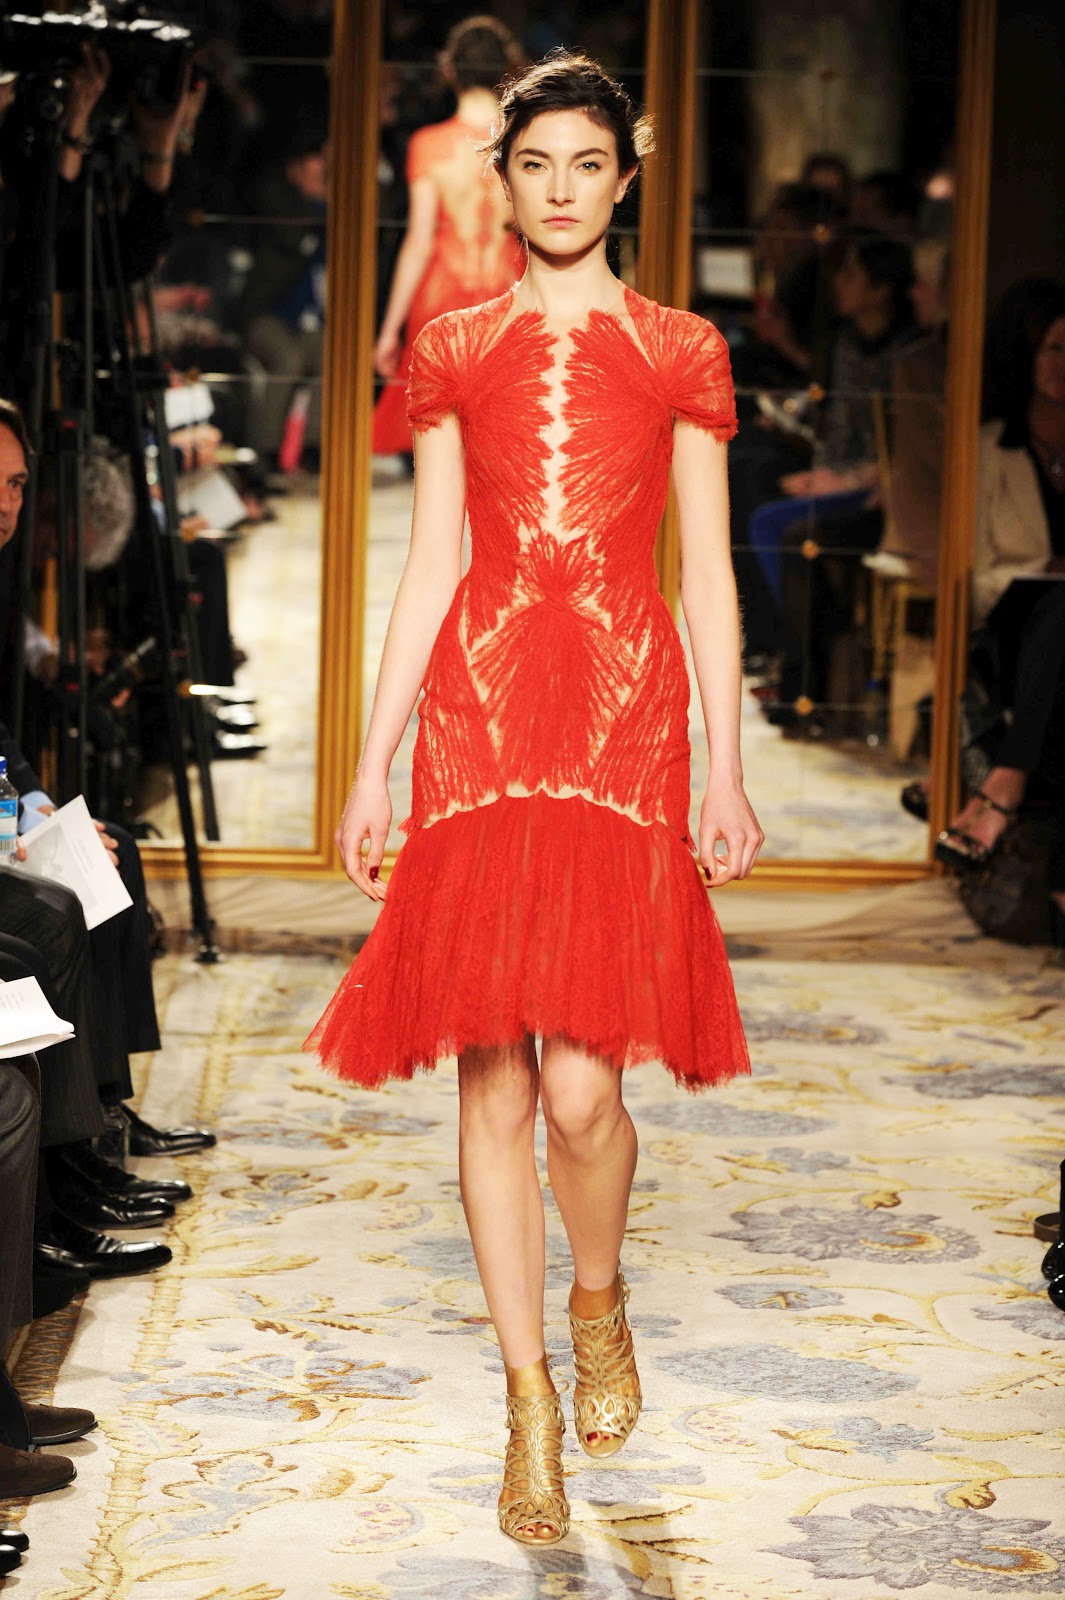 AMORE (Beauty + Fashion): Wedding Bell Wednesday - Marchesa AW11/12